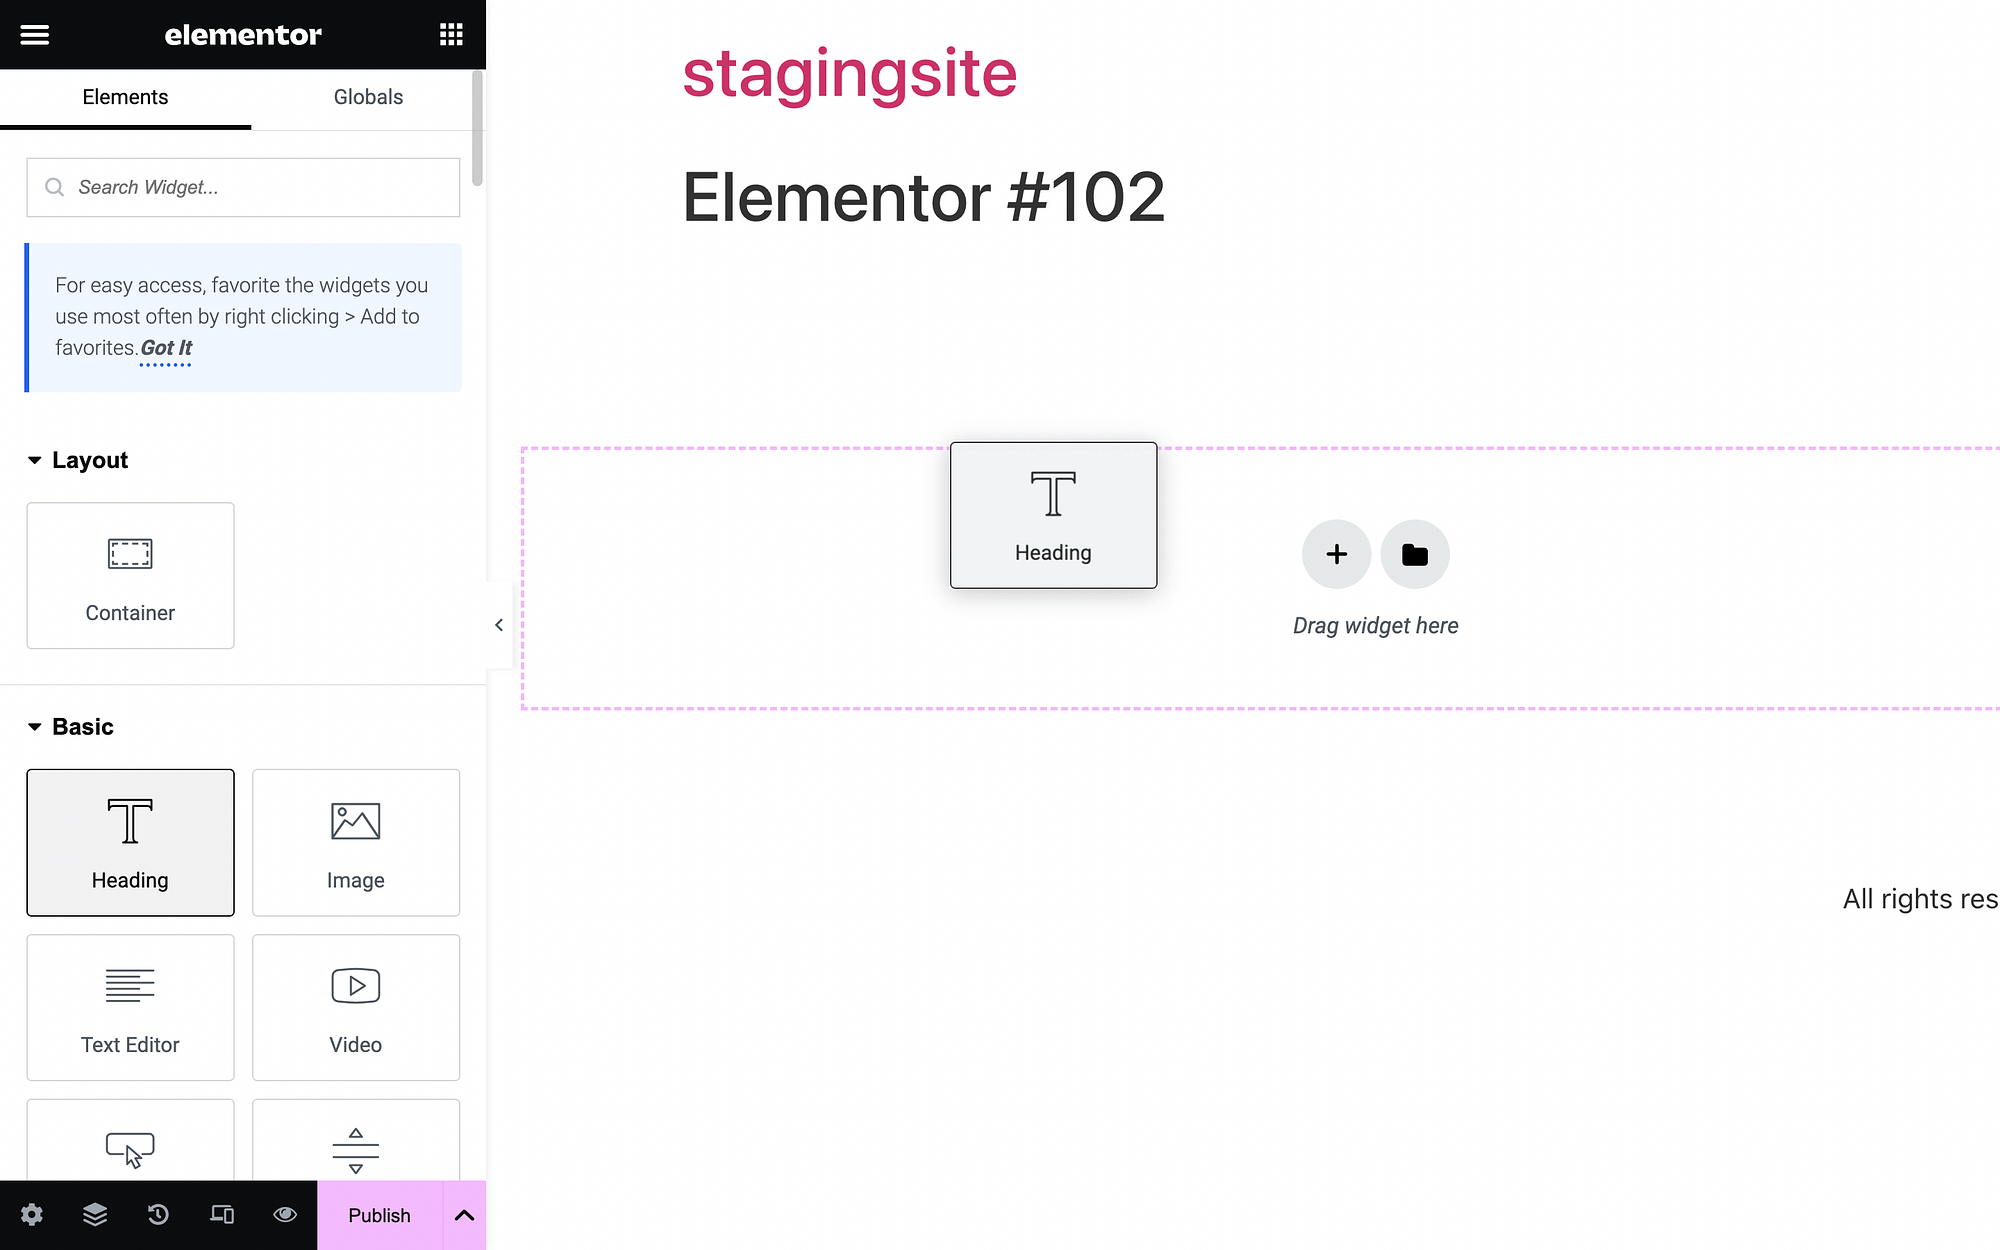 Elementor tutorial on how to drag and drop widgets.